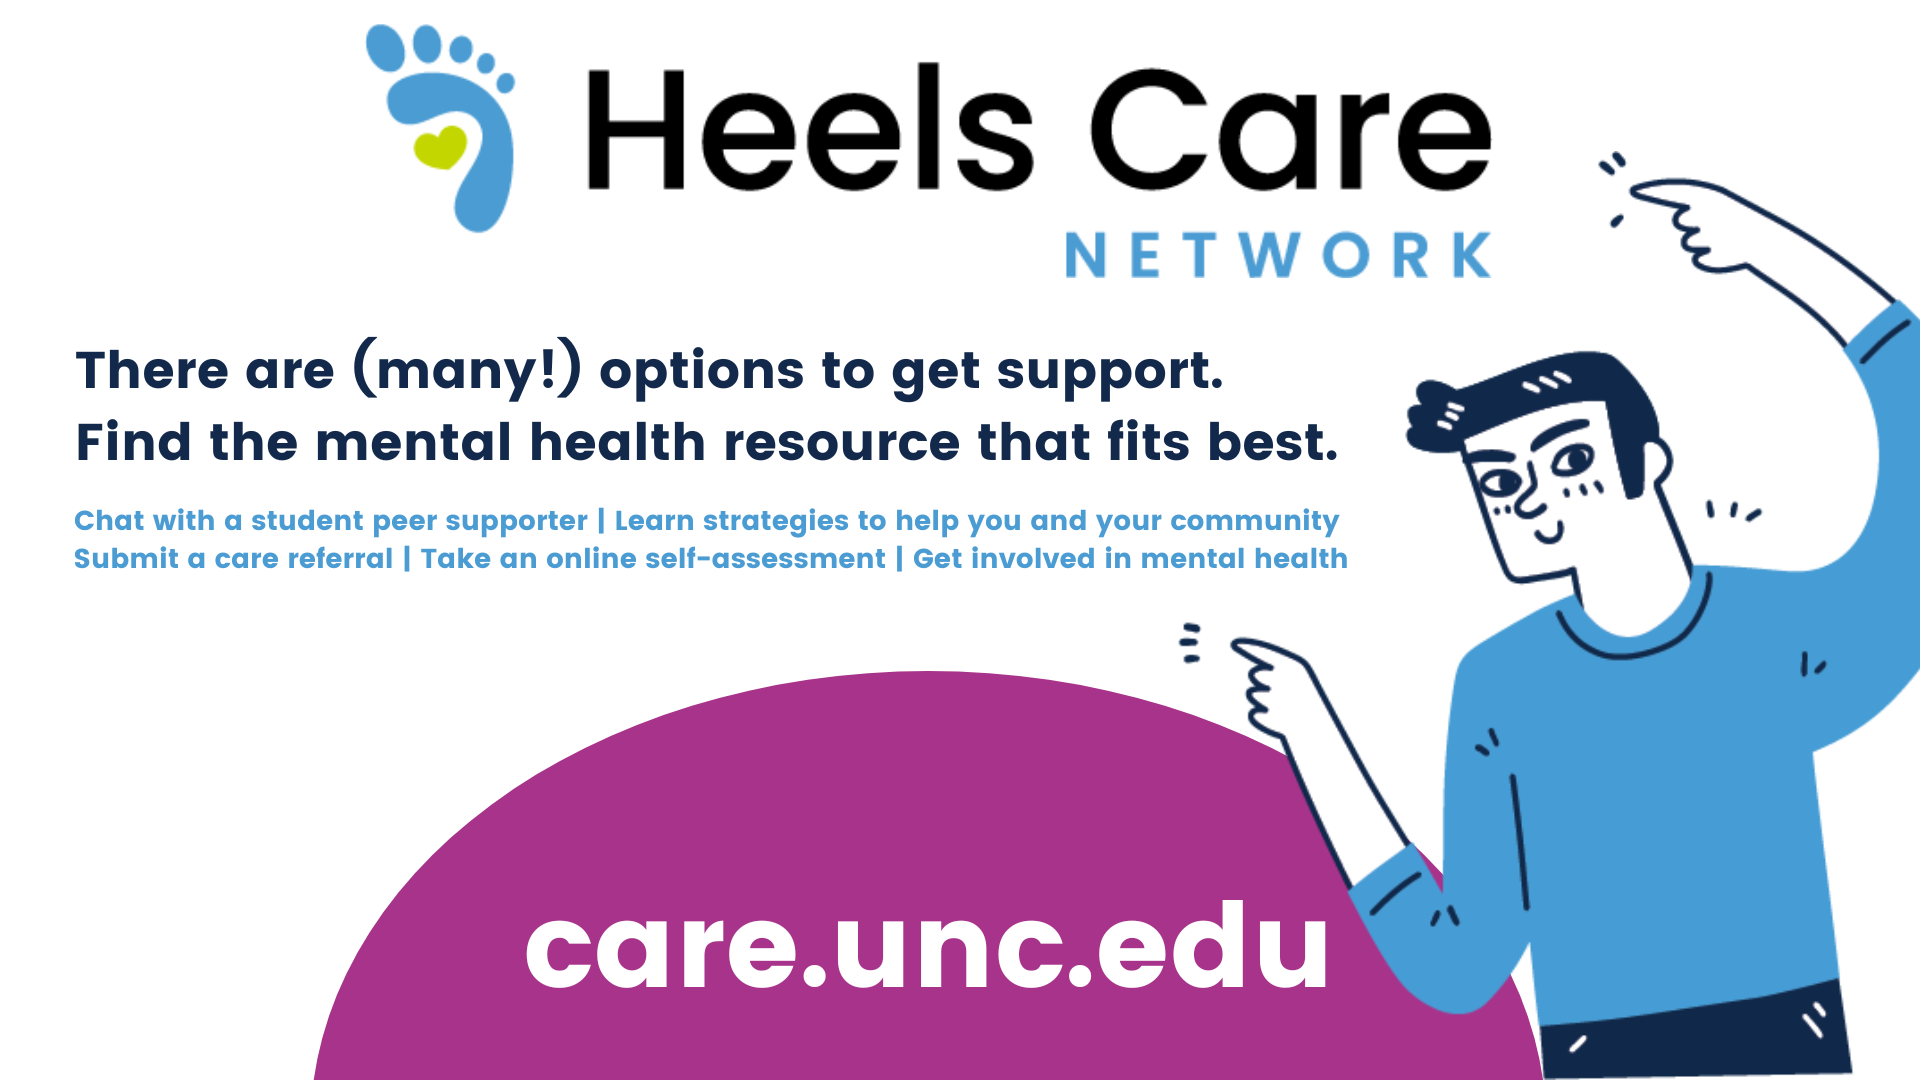 Heels Care Network. There are many options to get support. Find the mental health resource that fits best. 